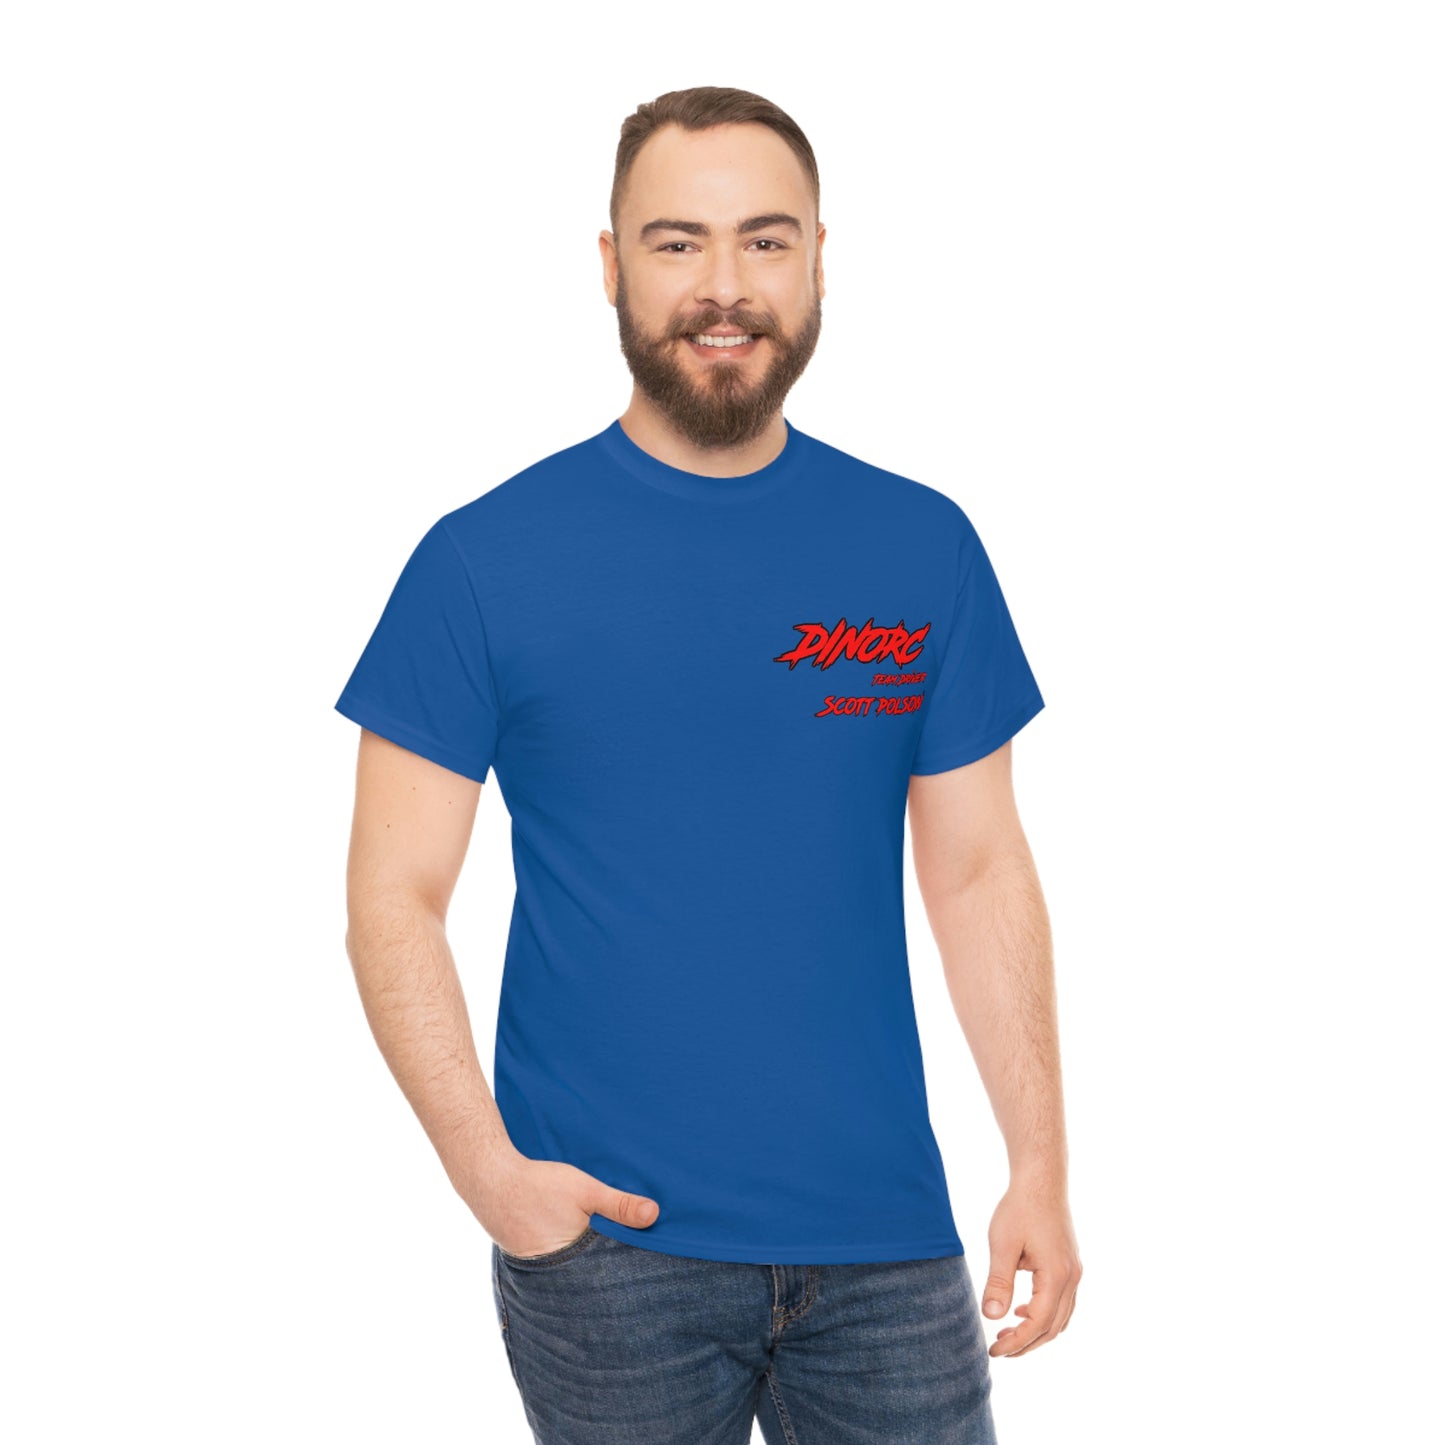 Team Driver Scott Polson Front and Back DinoRc Logo T-Shirt S-5x 5 colors